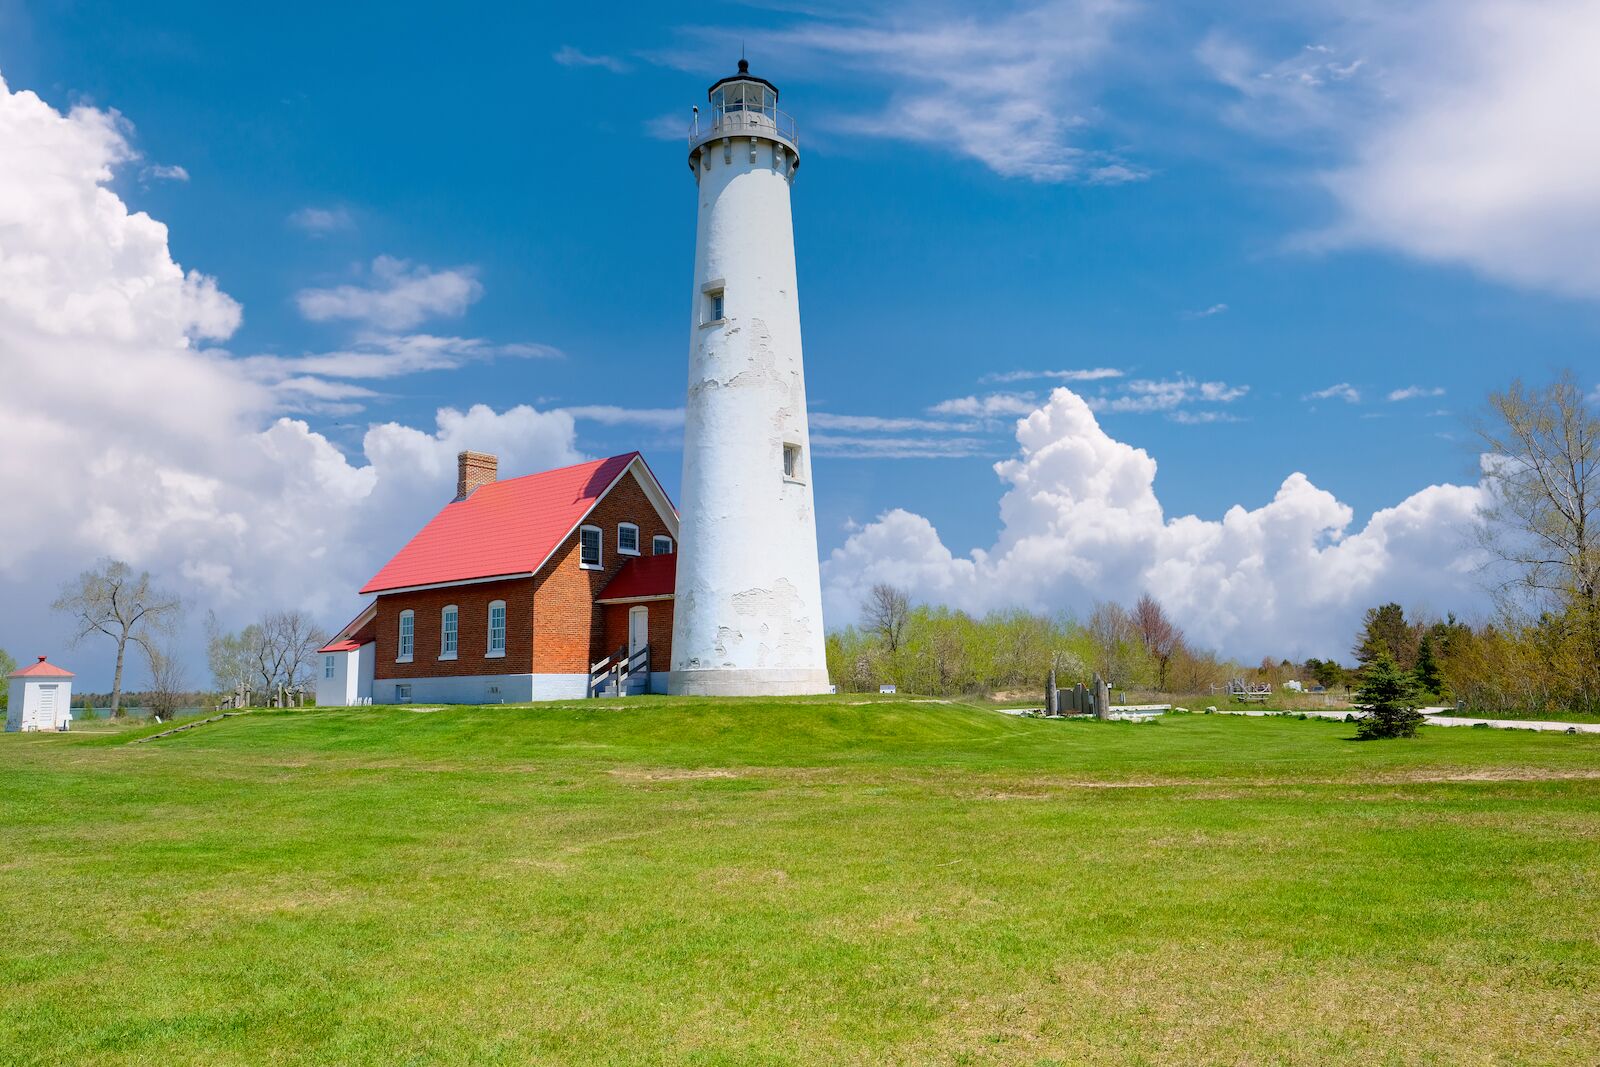 Tawas Point Lighthouse is one of the Michigan lighthouses where you can stay at